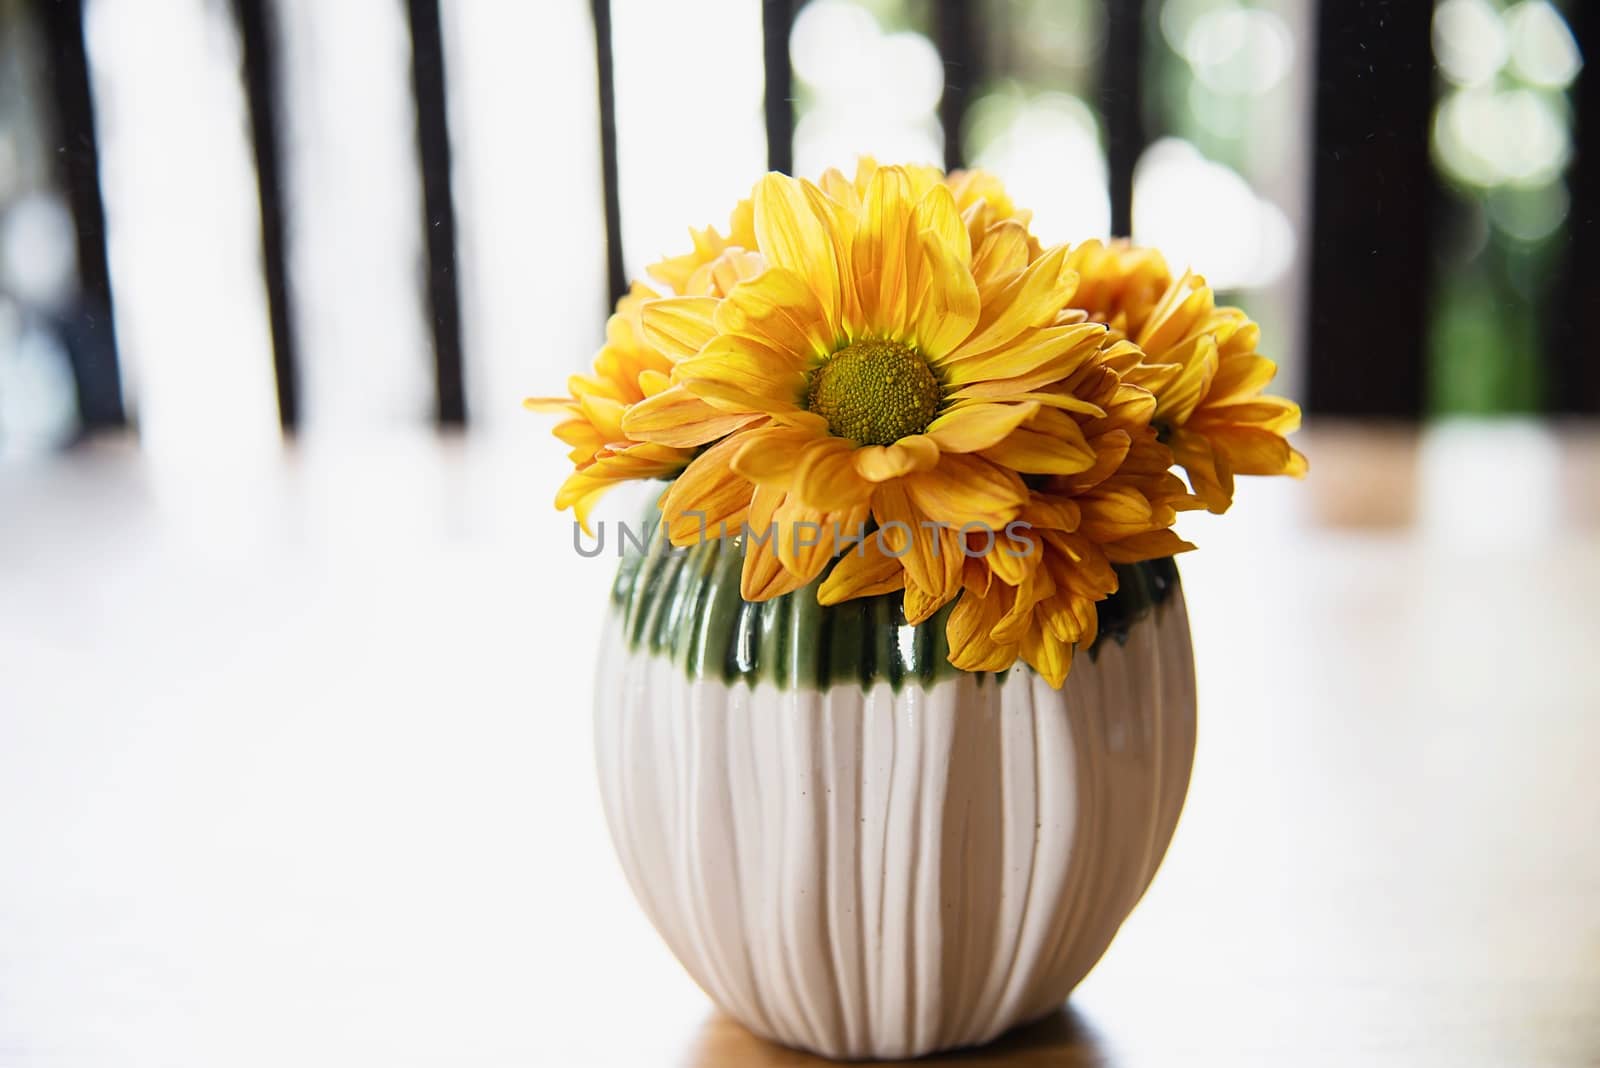 Fresh colorful small sun flower in ceramic pot - yellow flower decoration for background use